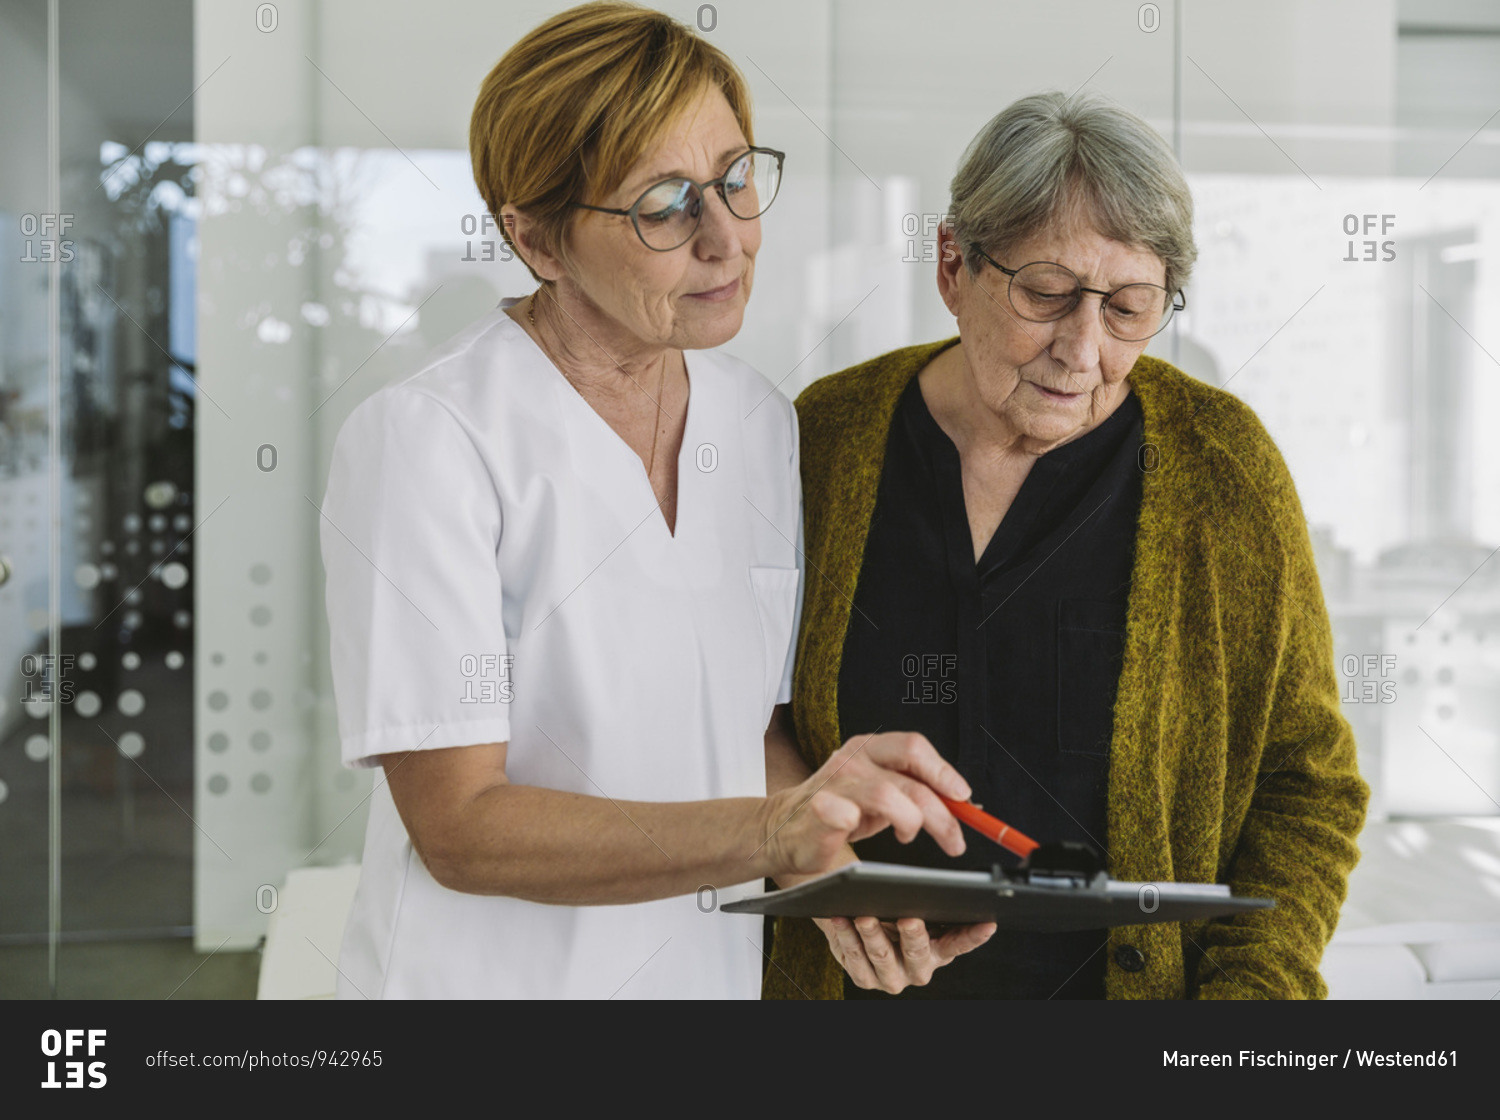 Medical secretary helping senior patient filling out document